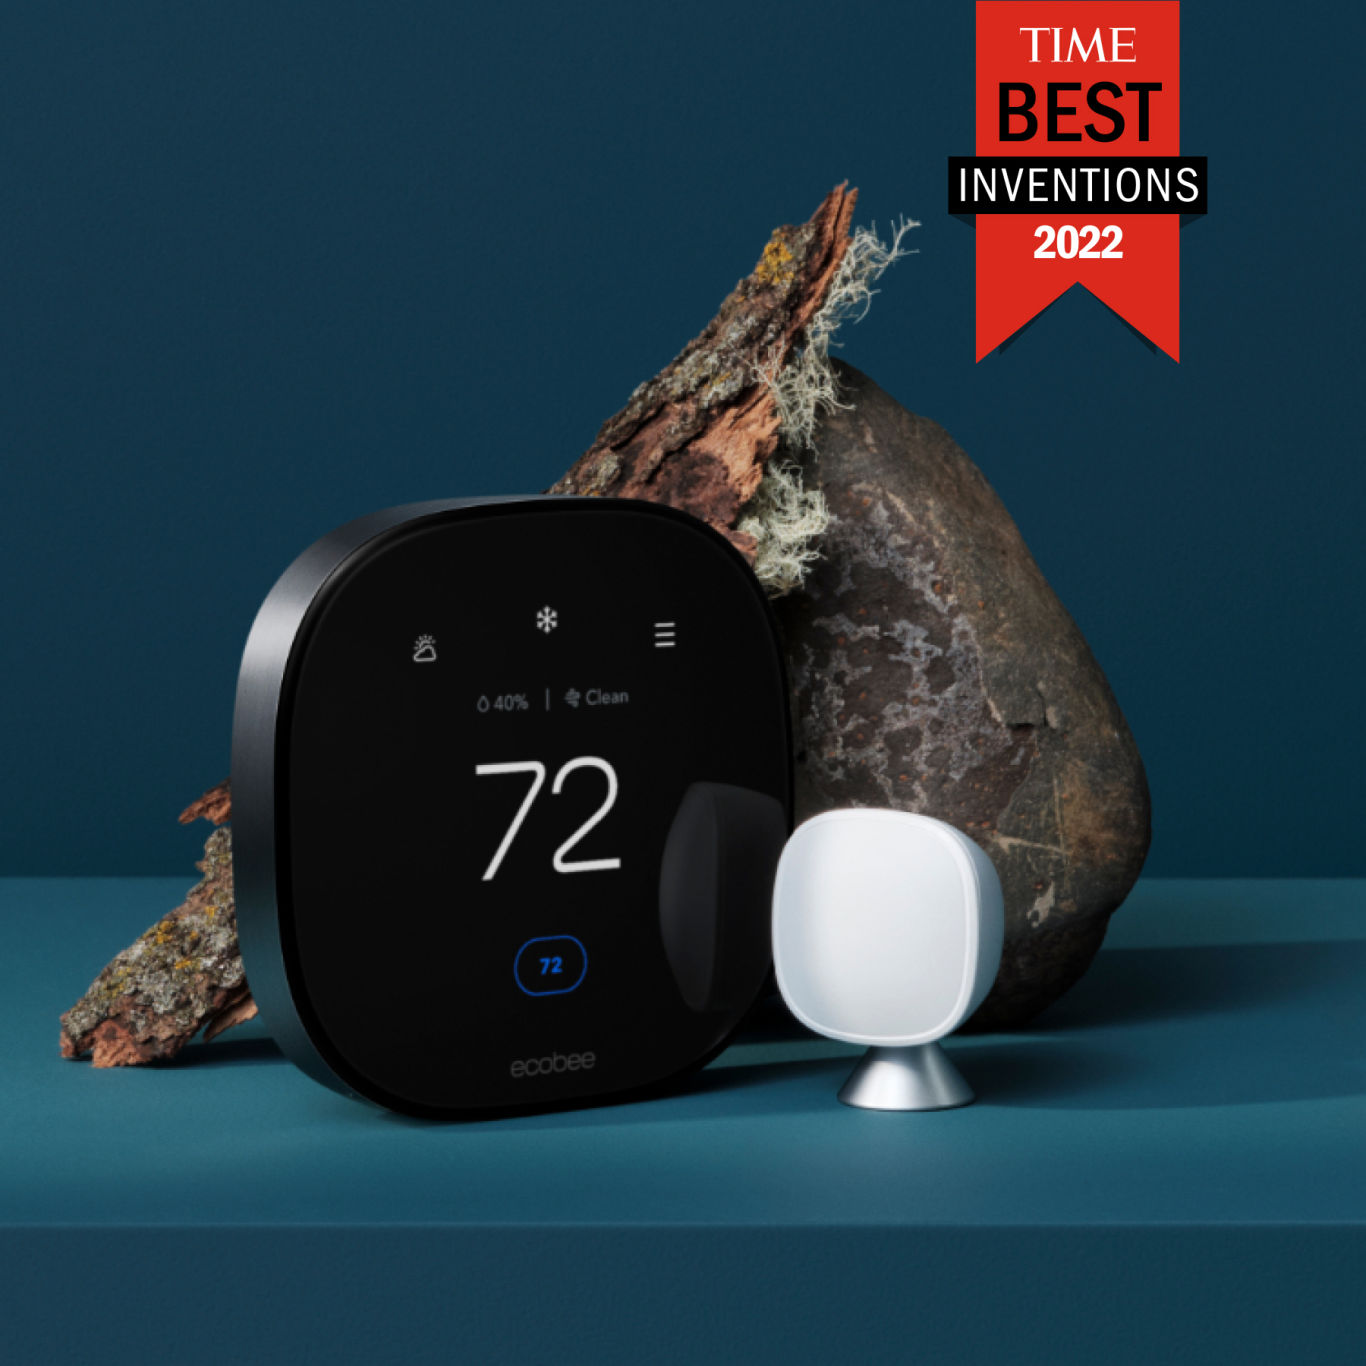 ecobee Smart Thermostat Premium with SmartSensor on a blue background against a rock with a mossy piece of tree bark. A red banner reads “TIME BEST INVENTIONS 2022”. The thermostat displays 72 degrees, and a clean air reading.